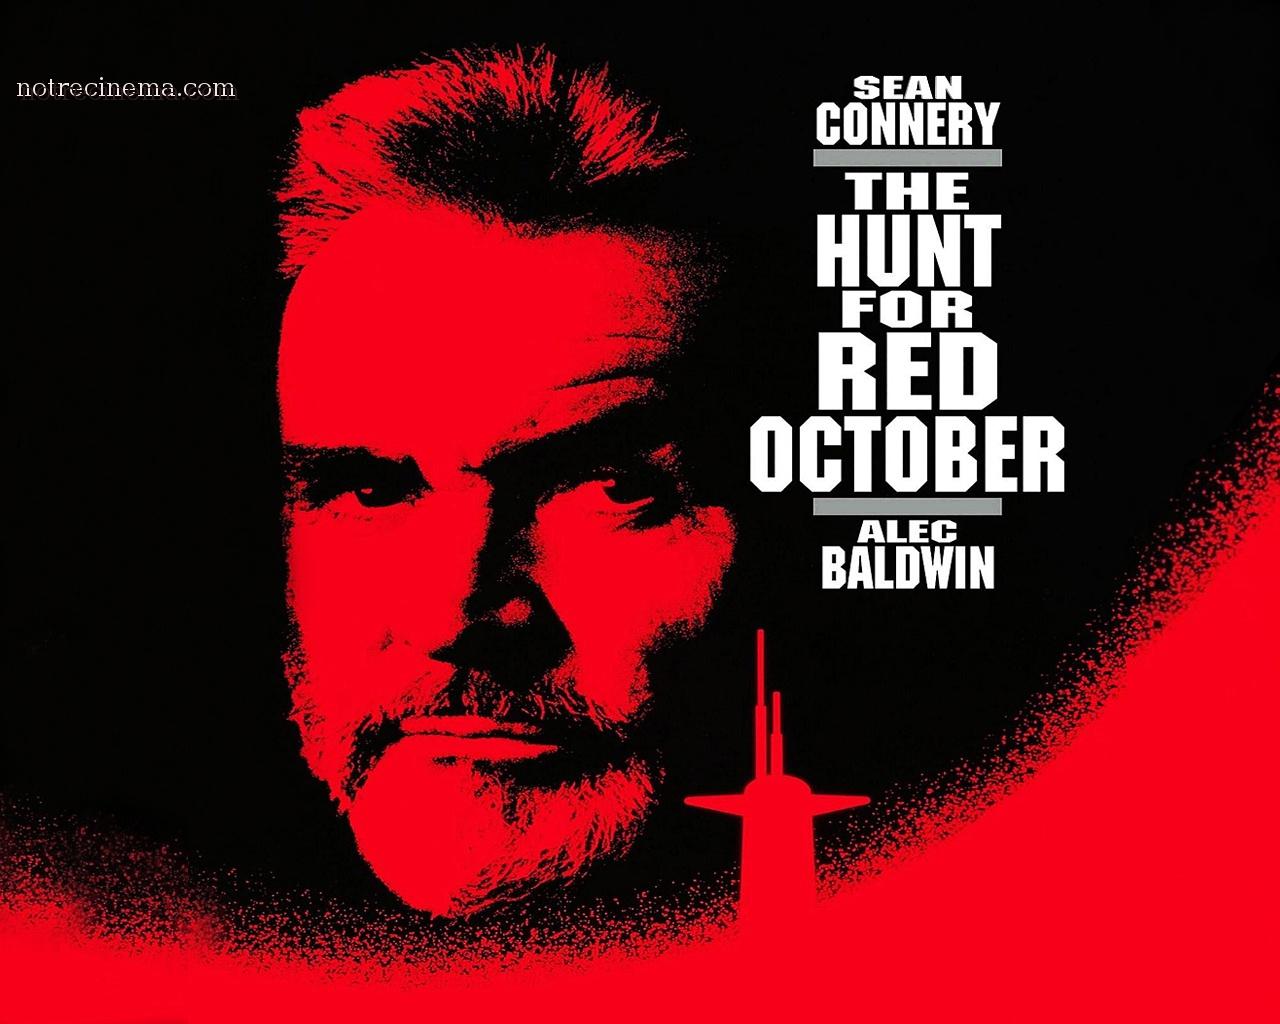 The Hunt for Red october